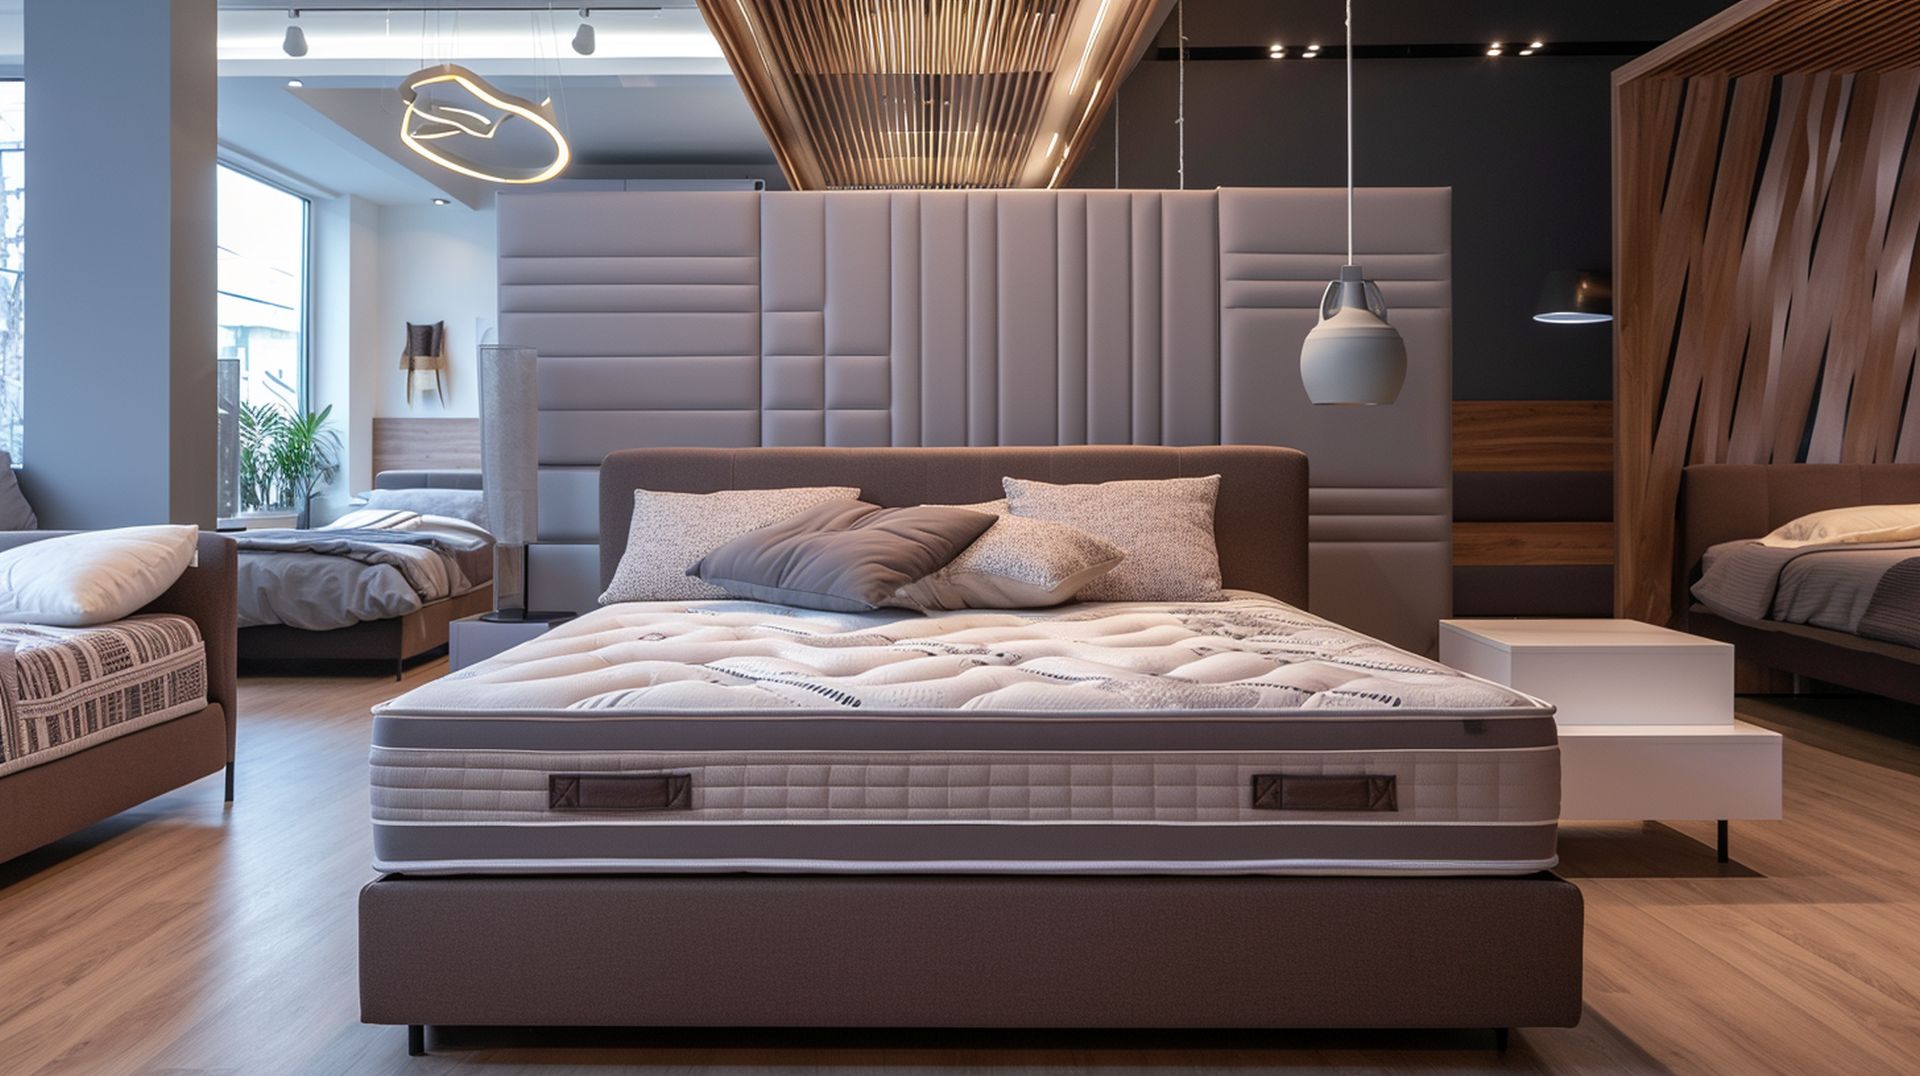 If you're looking for a new bed, mattress stores in San Tan Valley offer the best customer and delivery service, financing, and warranties in Arizona